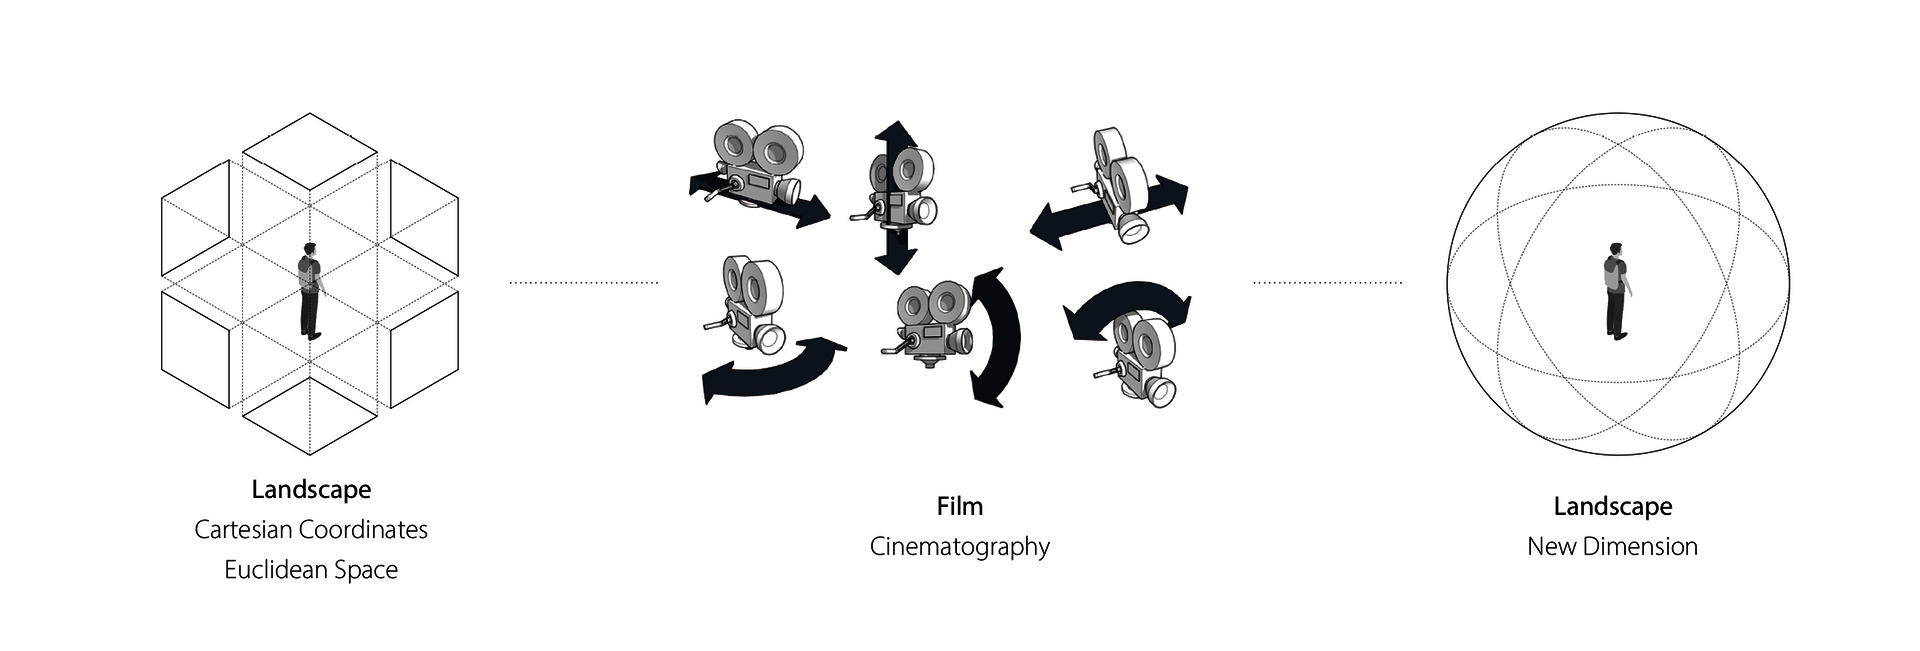 Spatial dimension and cinematography